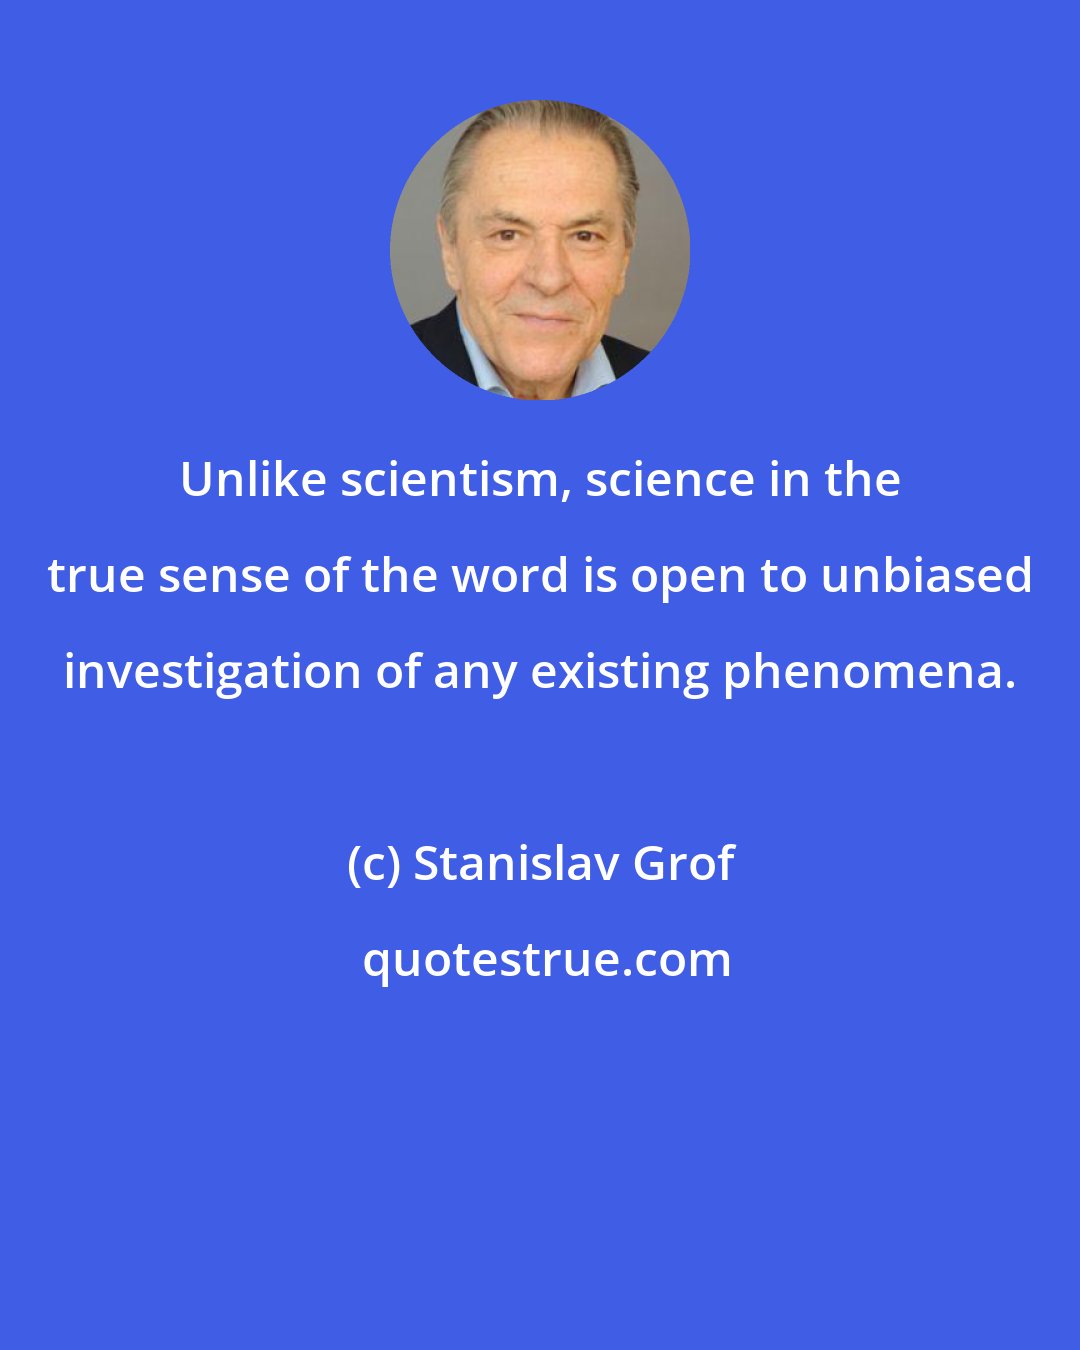 Stanislav Grof: Unlike scientism, science in the true sense of the word is open to unbiased investigation of any existing phenomena.